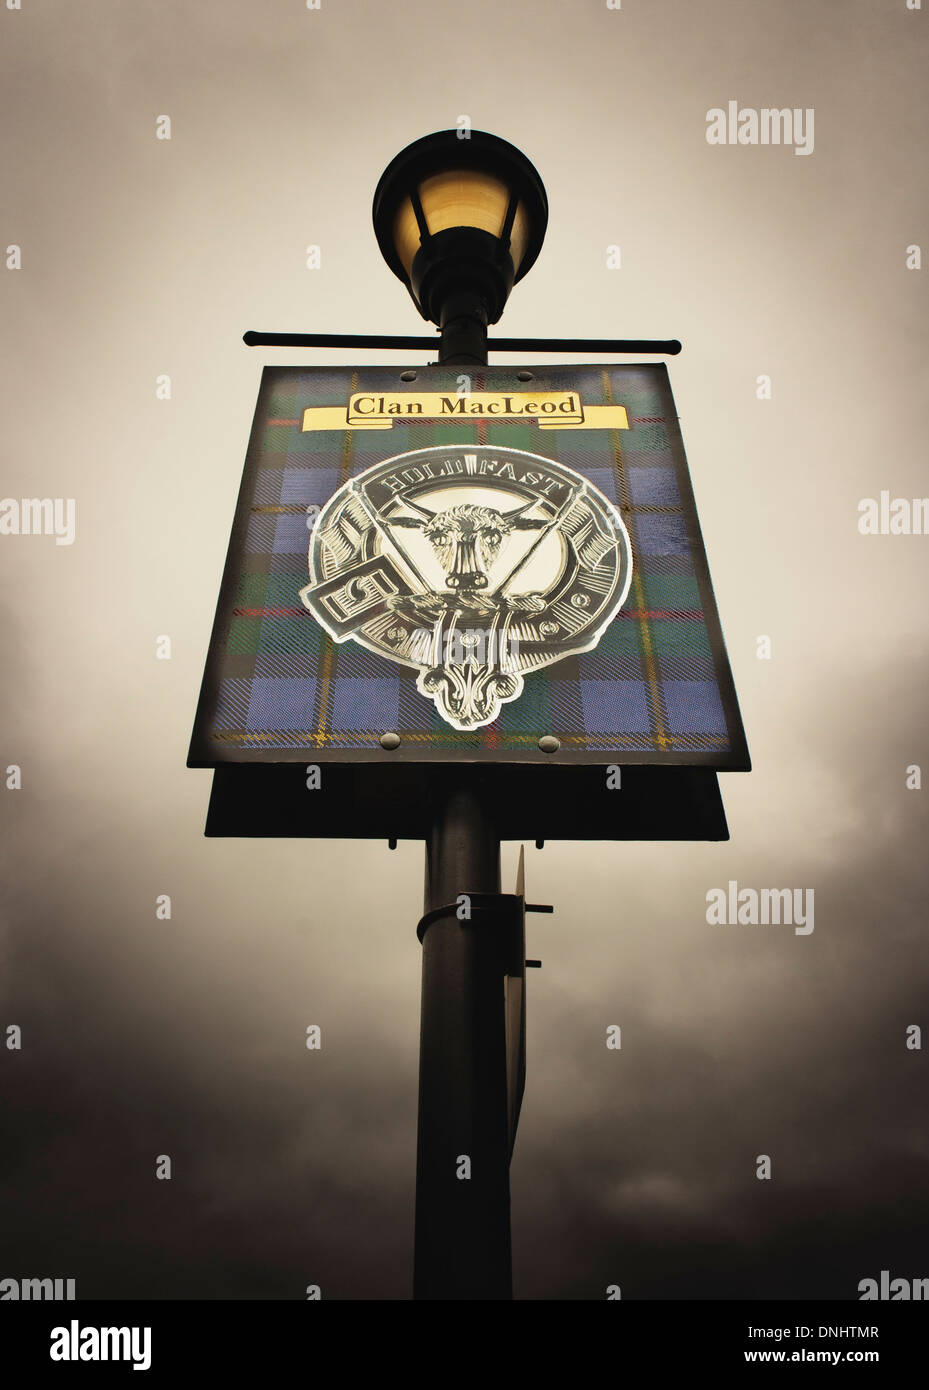 Clan MacLeod Crest on street lamp with brooding sky Stock Photo